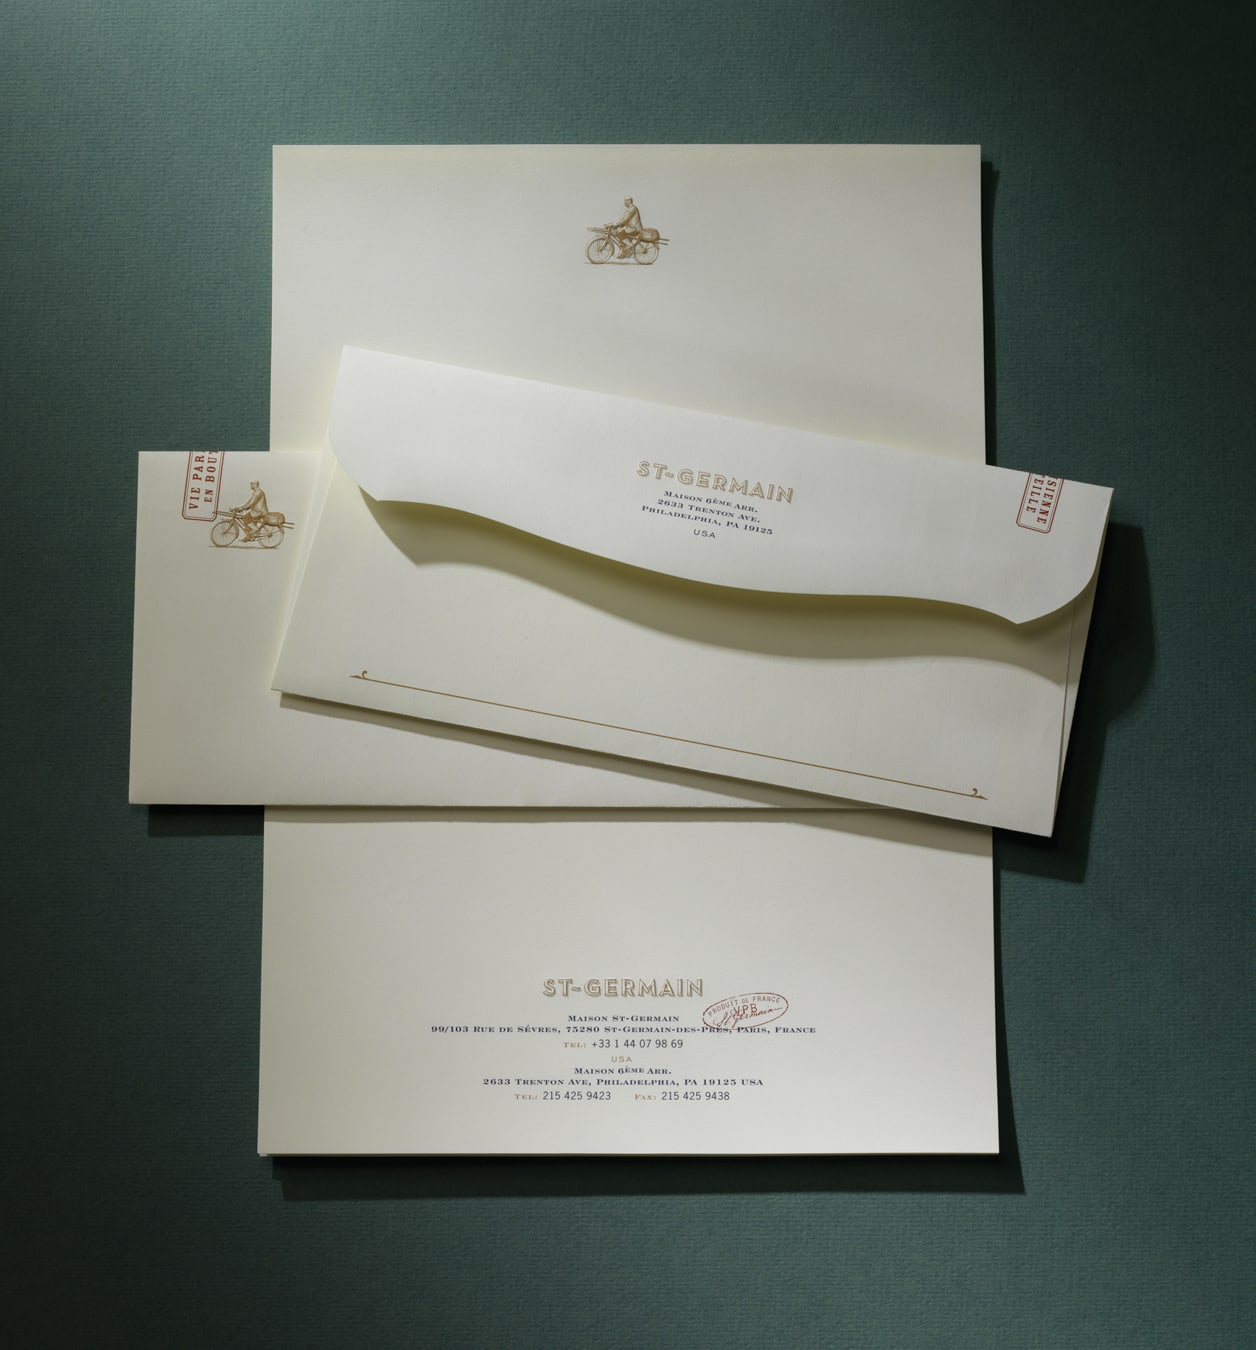 St-Germain spirits identity design collateral letterhead and envelope